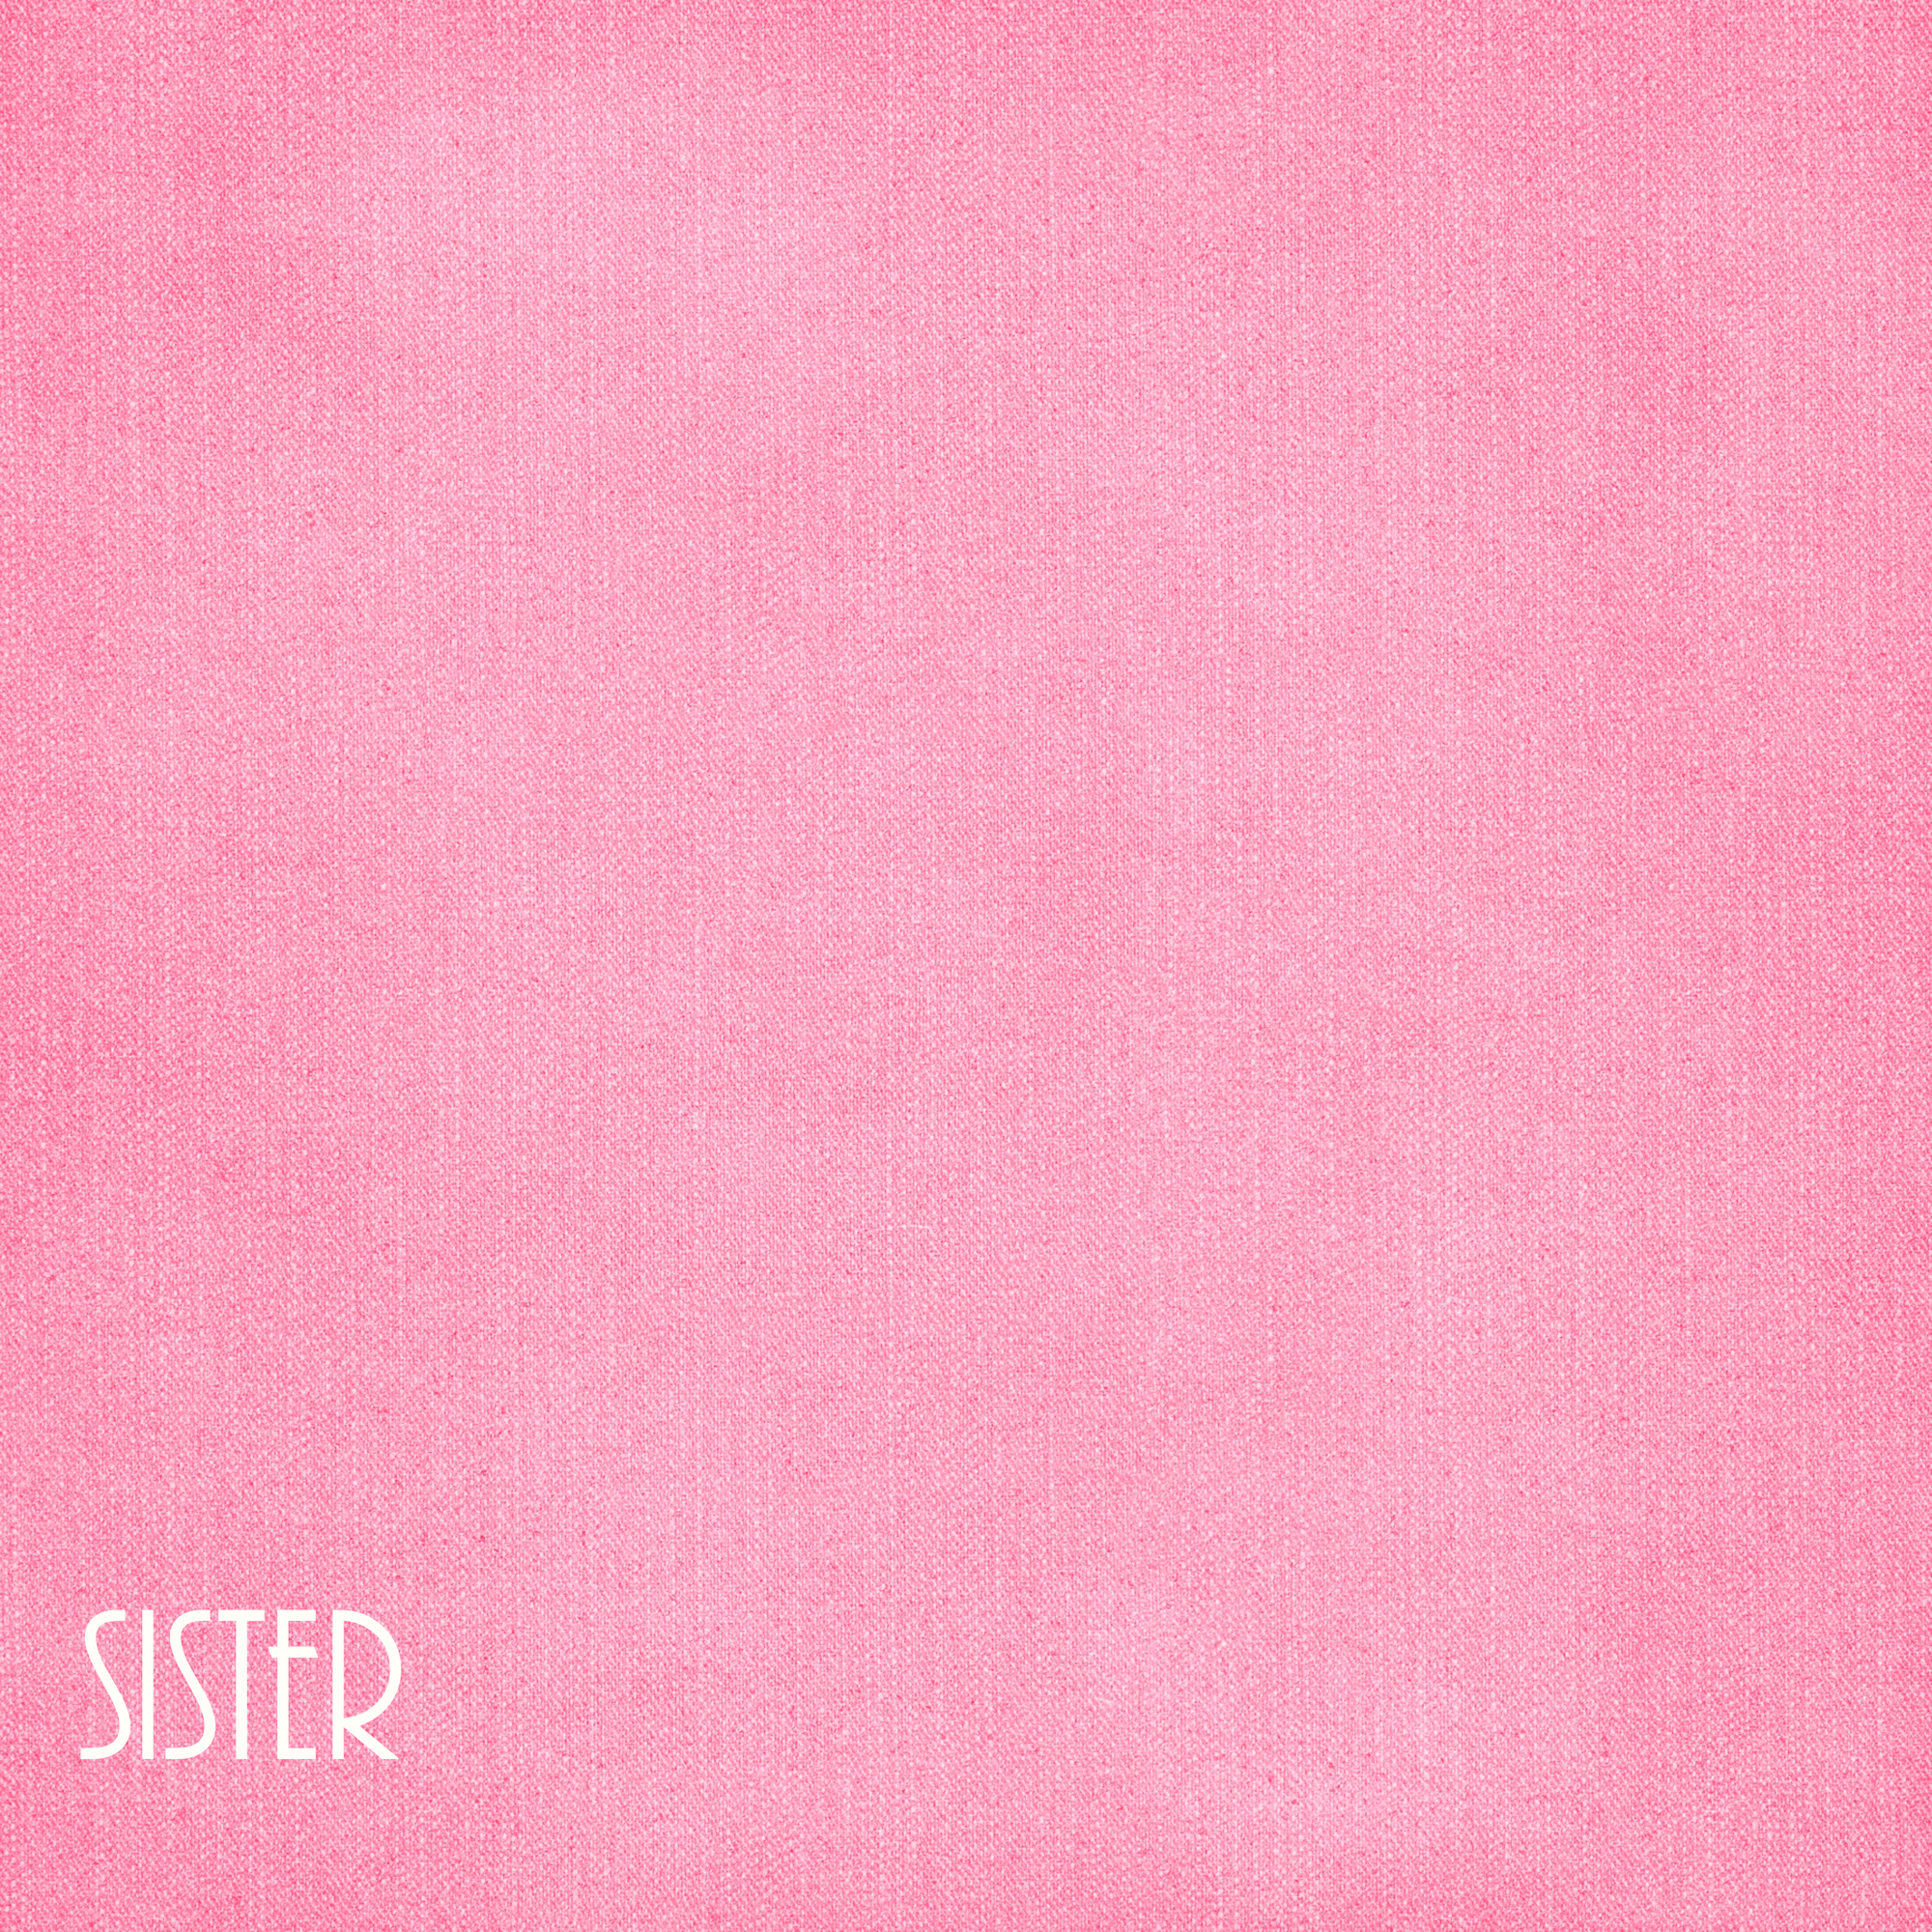 Family Collection Sister 12 x 12 Double-Sided Scrapbook Paper by SSC Designs